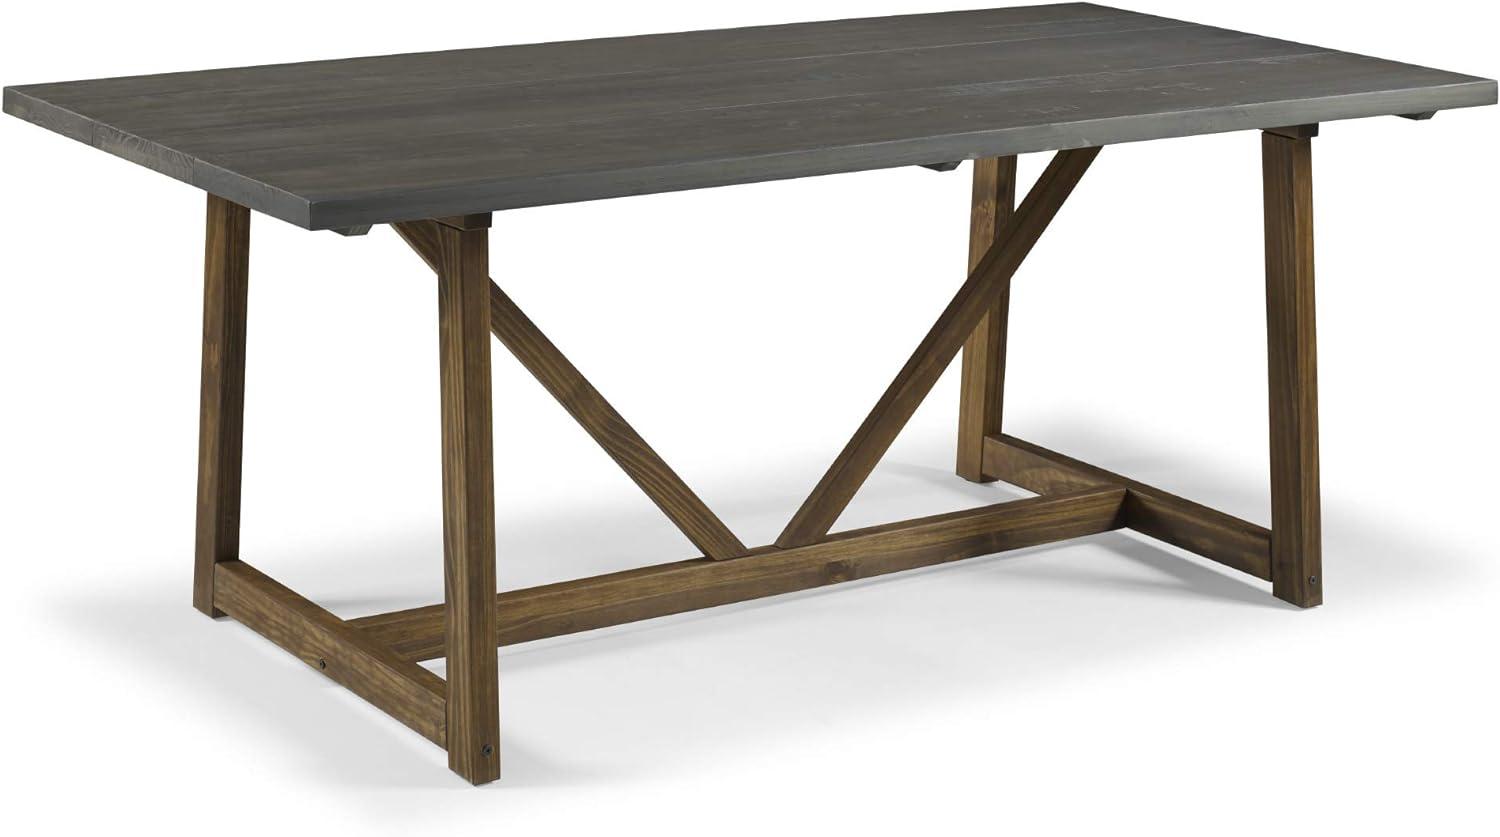 Farmhouse Haven 72" Reclaimed Pine Wood Rustic Dining Table